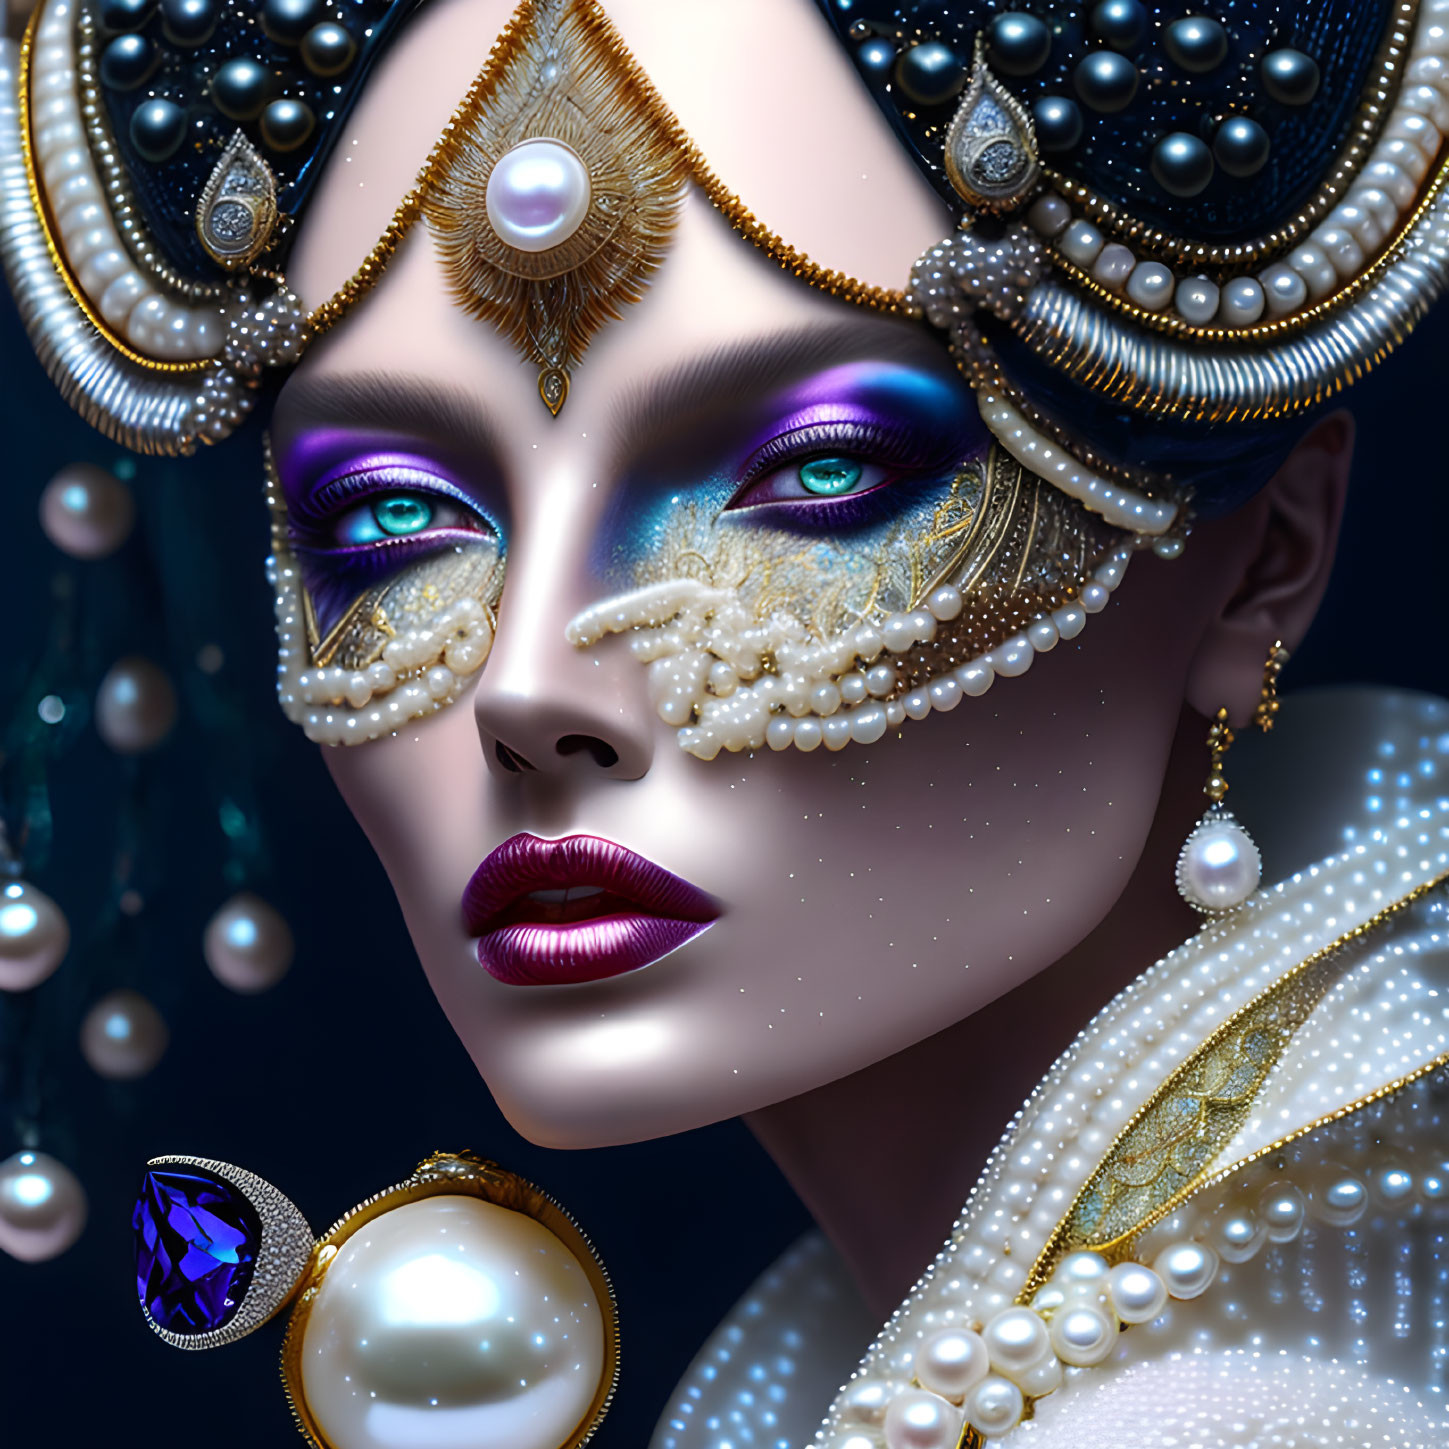 Intricate Pearl Jewelry and Vibrant Makeup Artwork